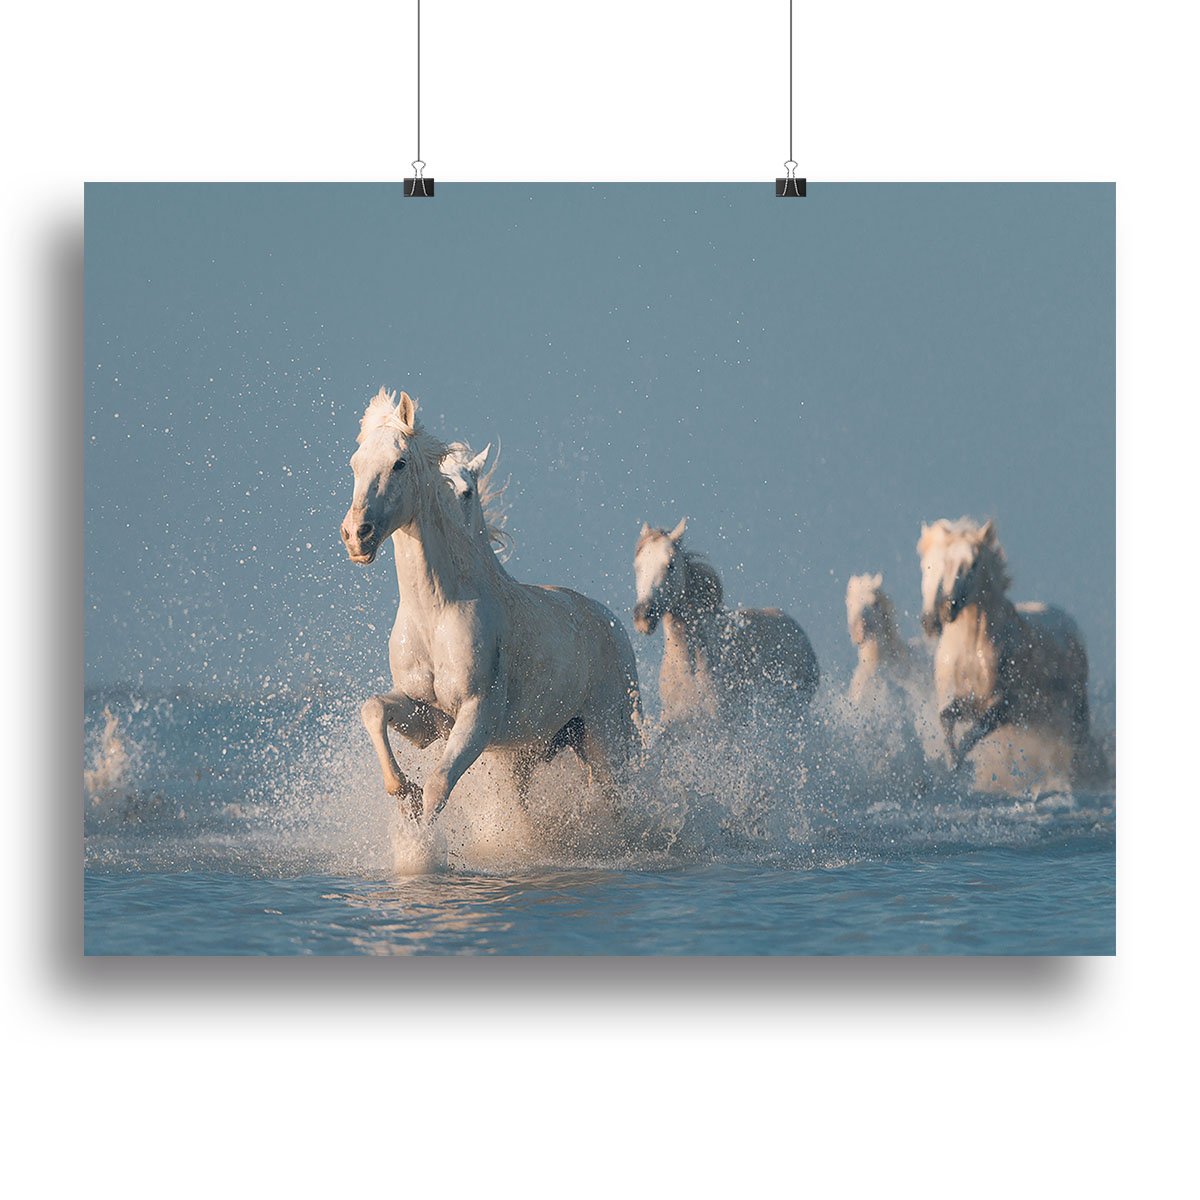 Wite Horses Running In Water Canvas Print or Poster - Canvas Art Rocks - 2